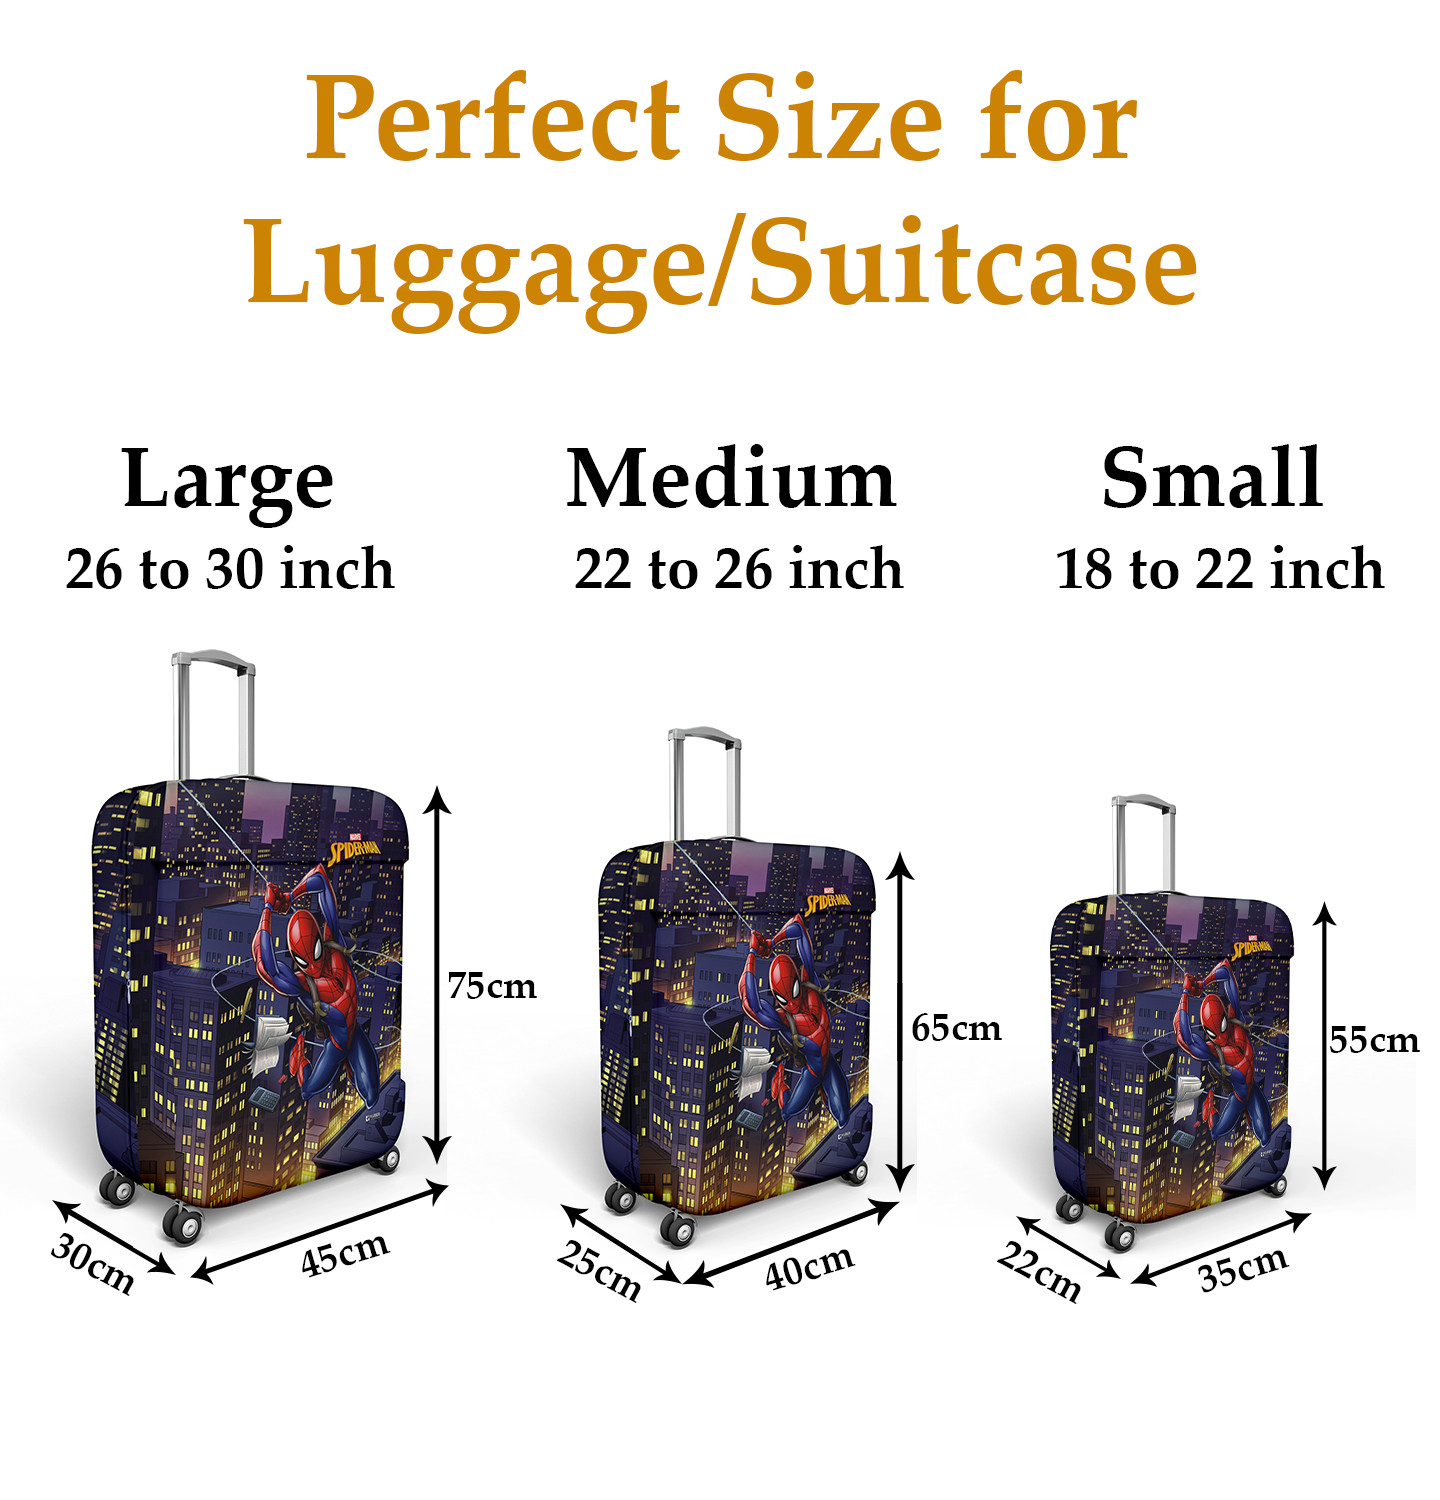 Kuber Industries Marvel Spiderman Luggage Cover|Polyester Travel Suitcase Cover|Washable|Stretchable Suitcase Cover|18-22 Inch-Small|22-26 Inch-Medium|Pack of 2 (Multicolor)